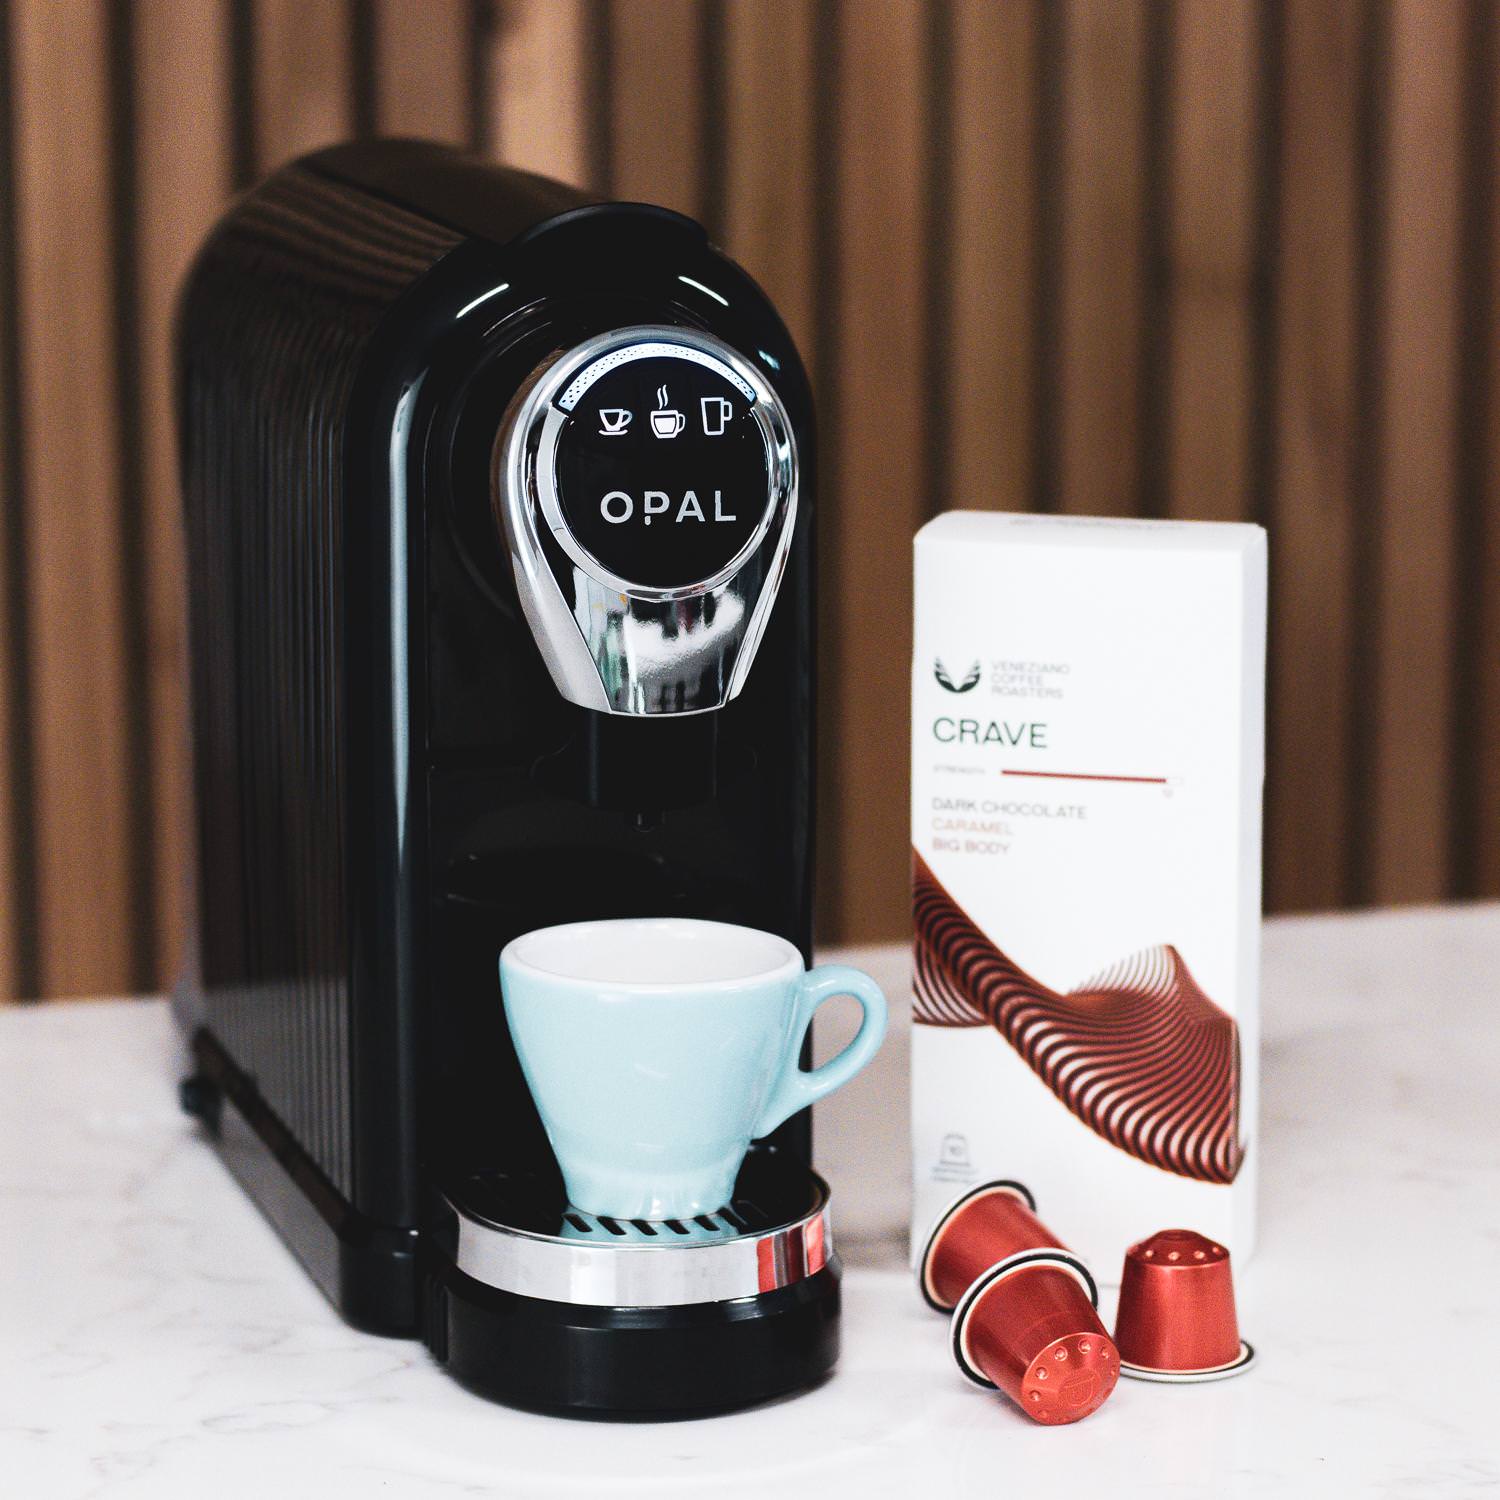 The OPAL One machine is the perfect partner for specialty coffee pods